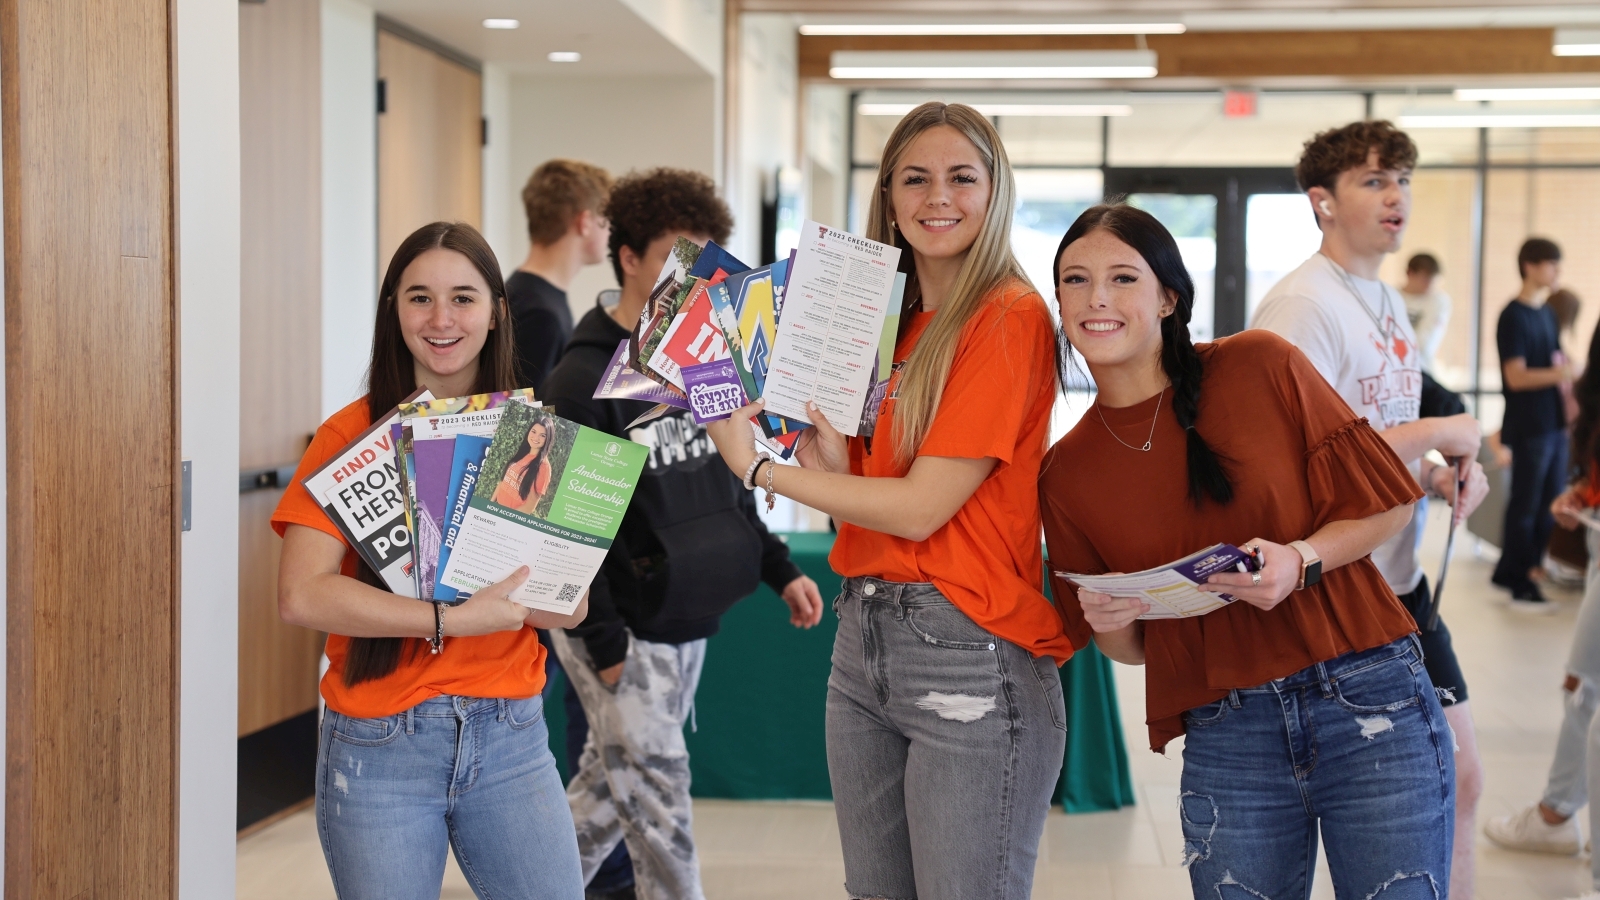 Students holding items